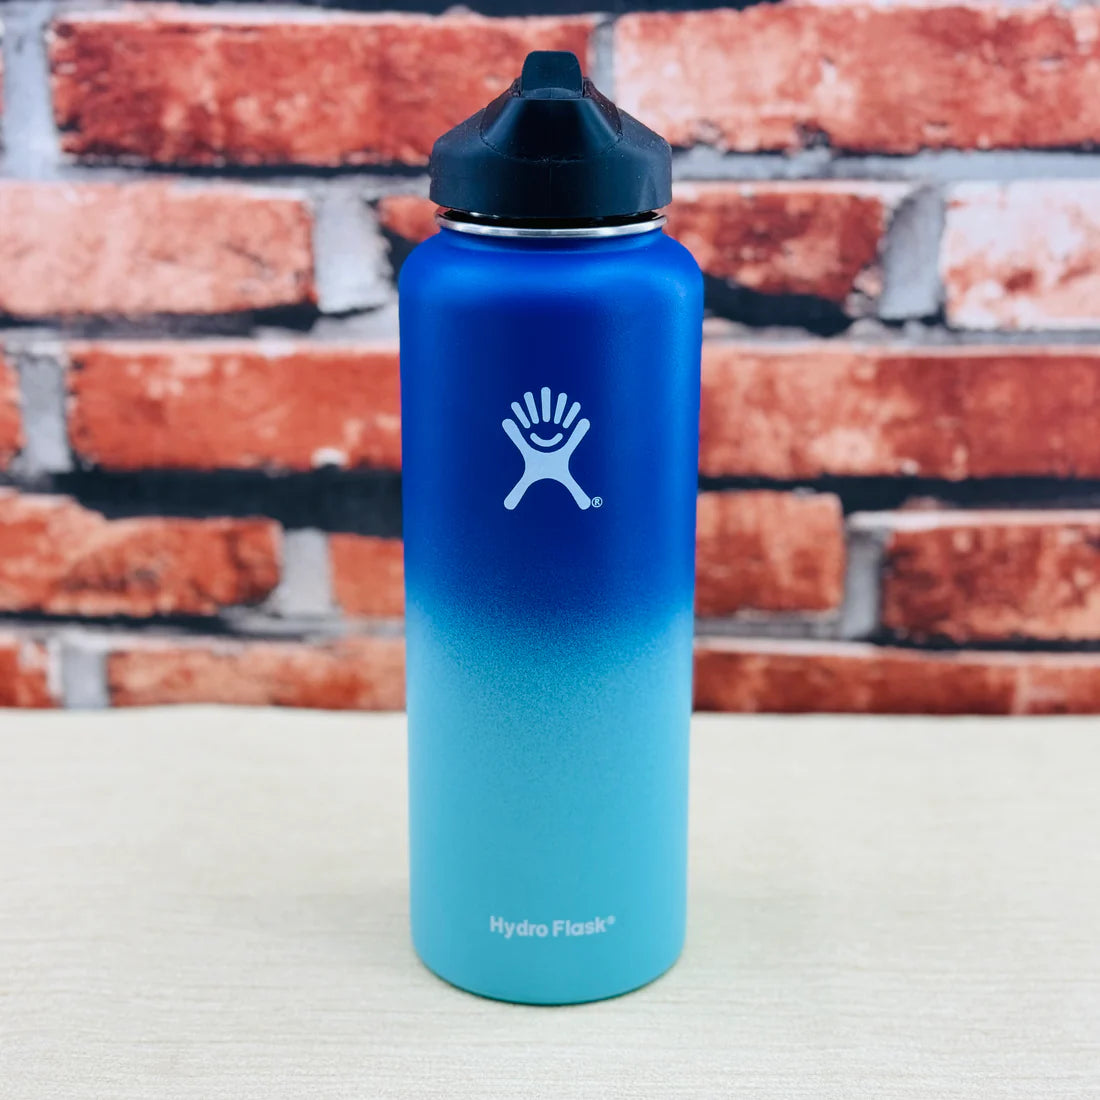 Hydro Flask Insulated Sports Water Bottle